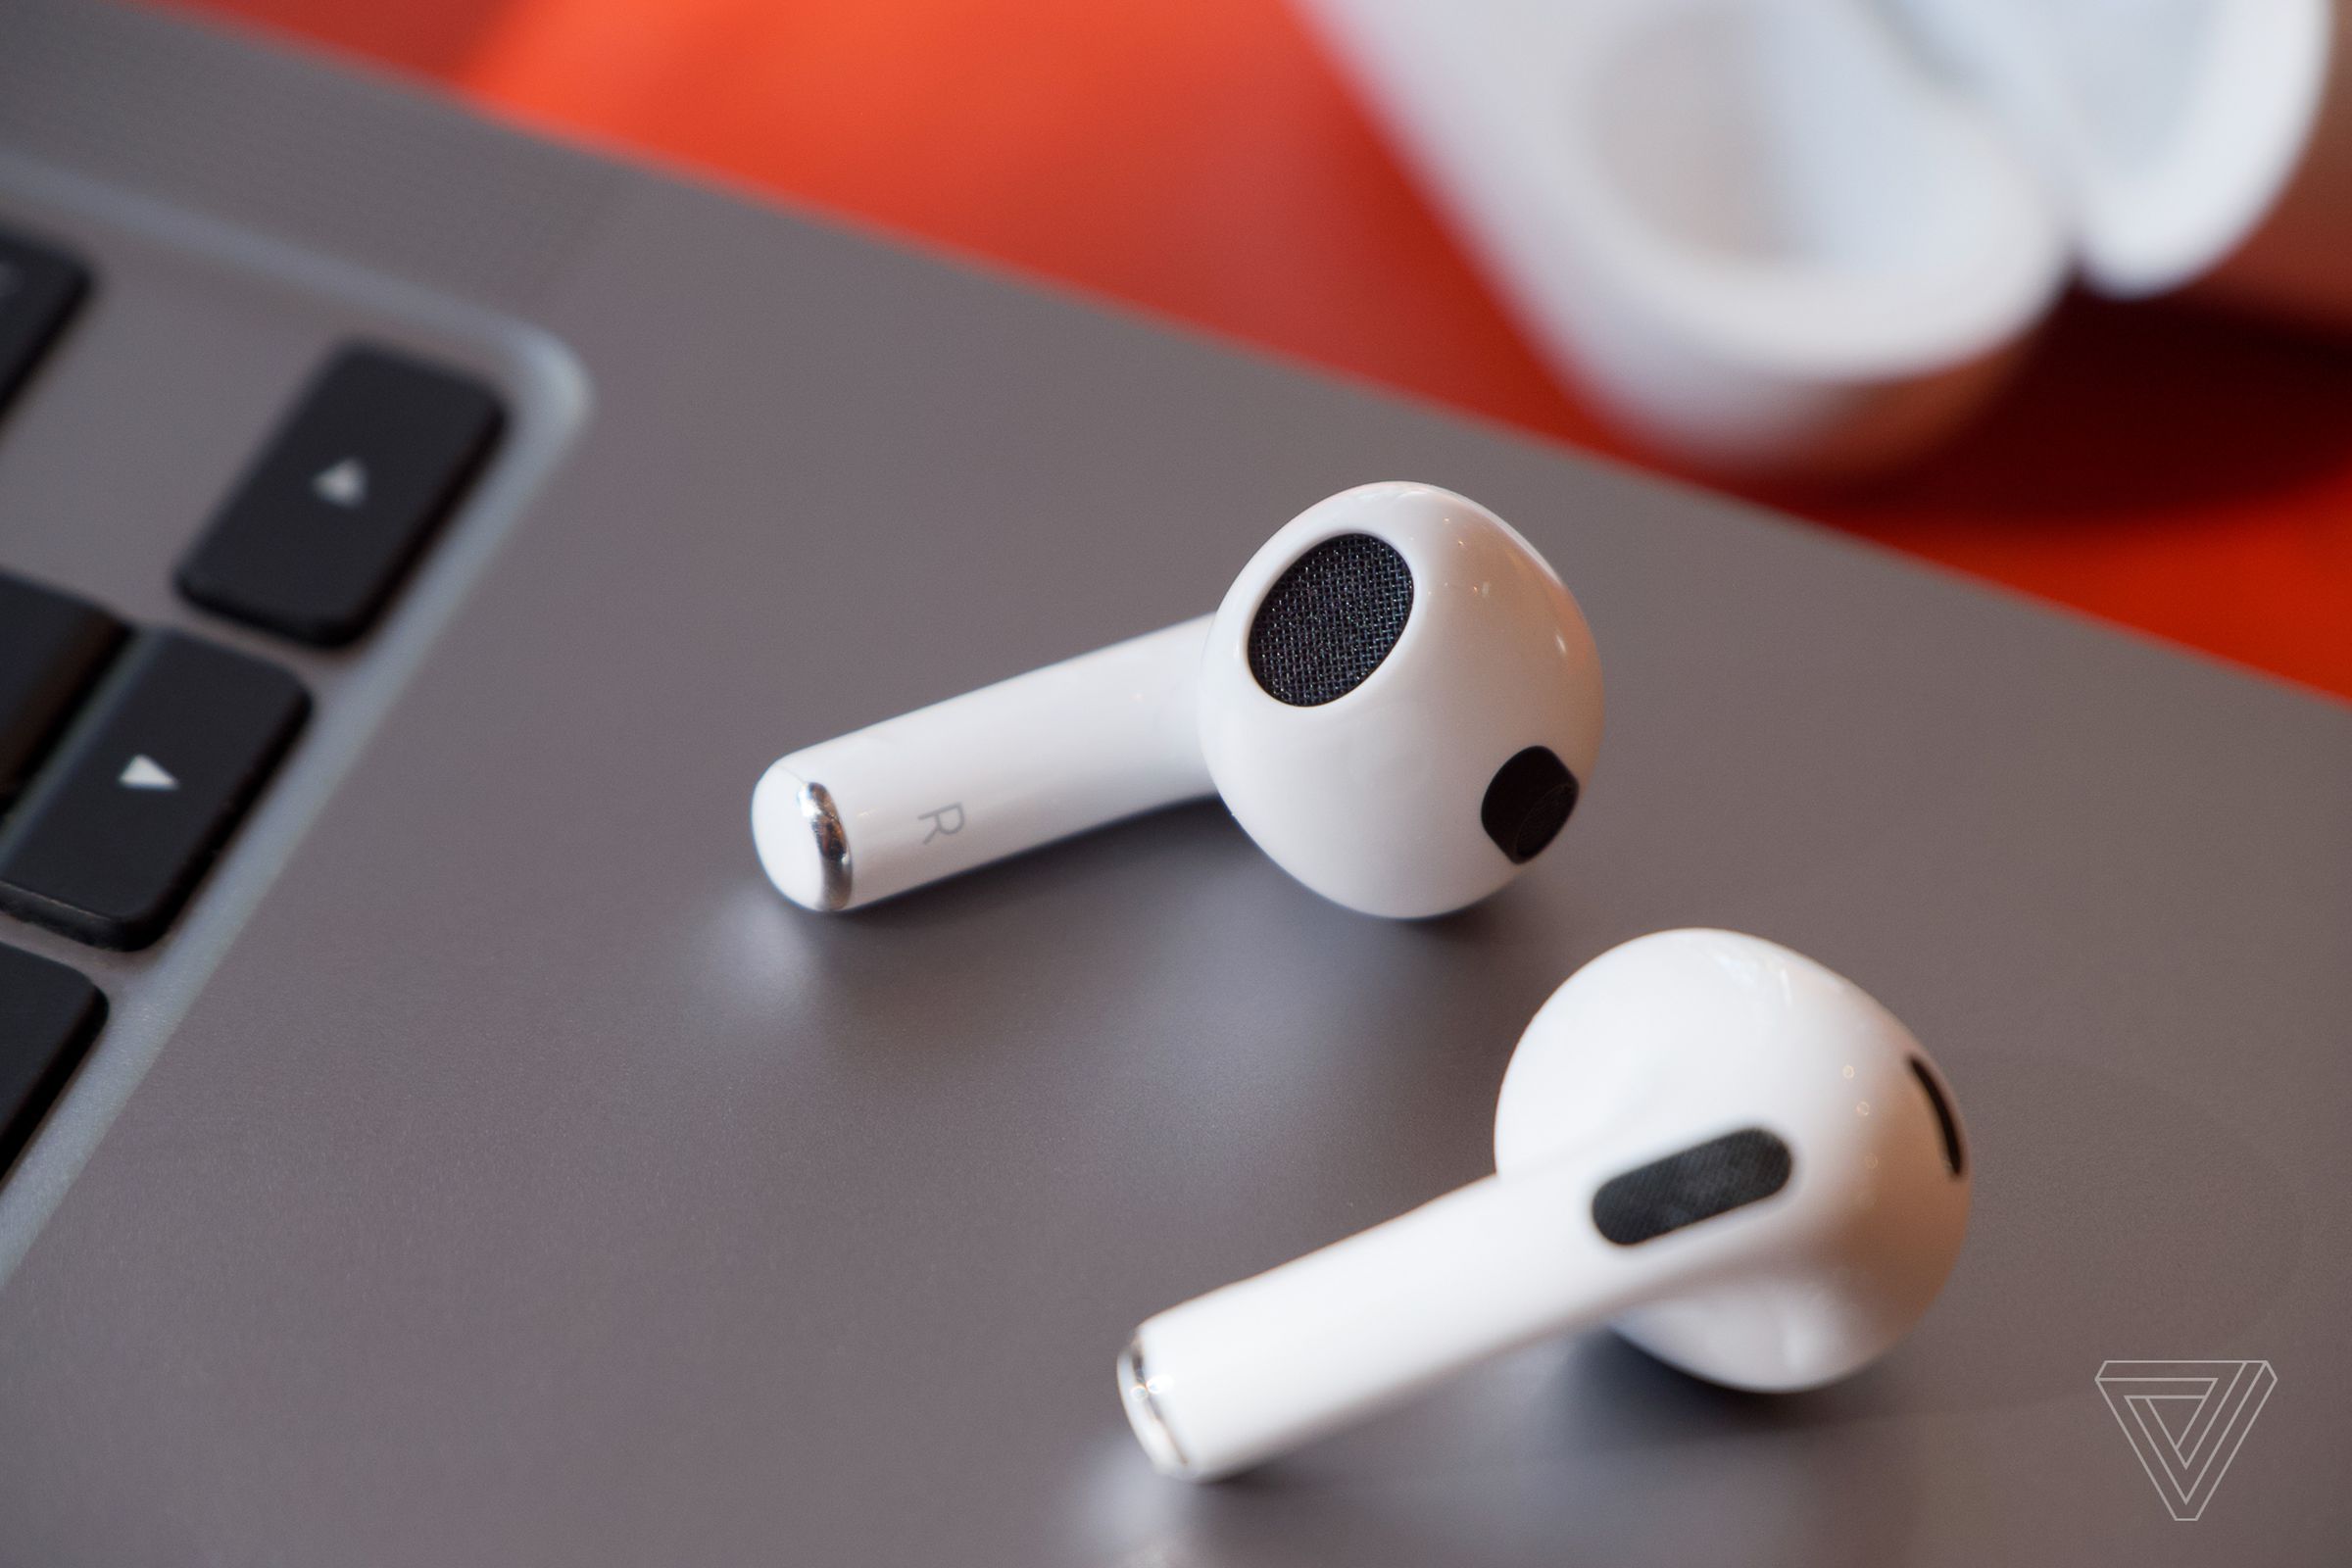 A photo showing the third-gen AirPods